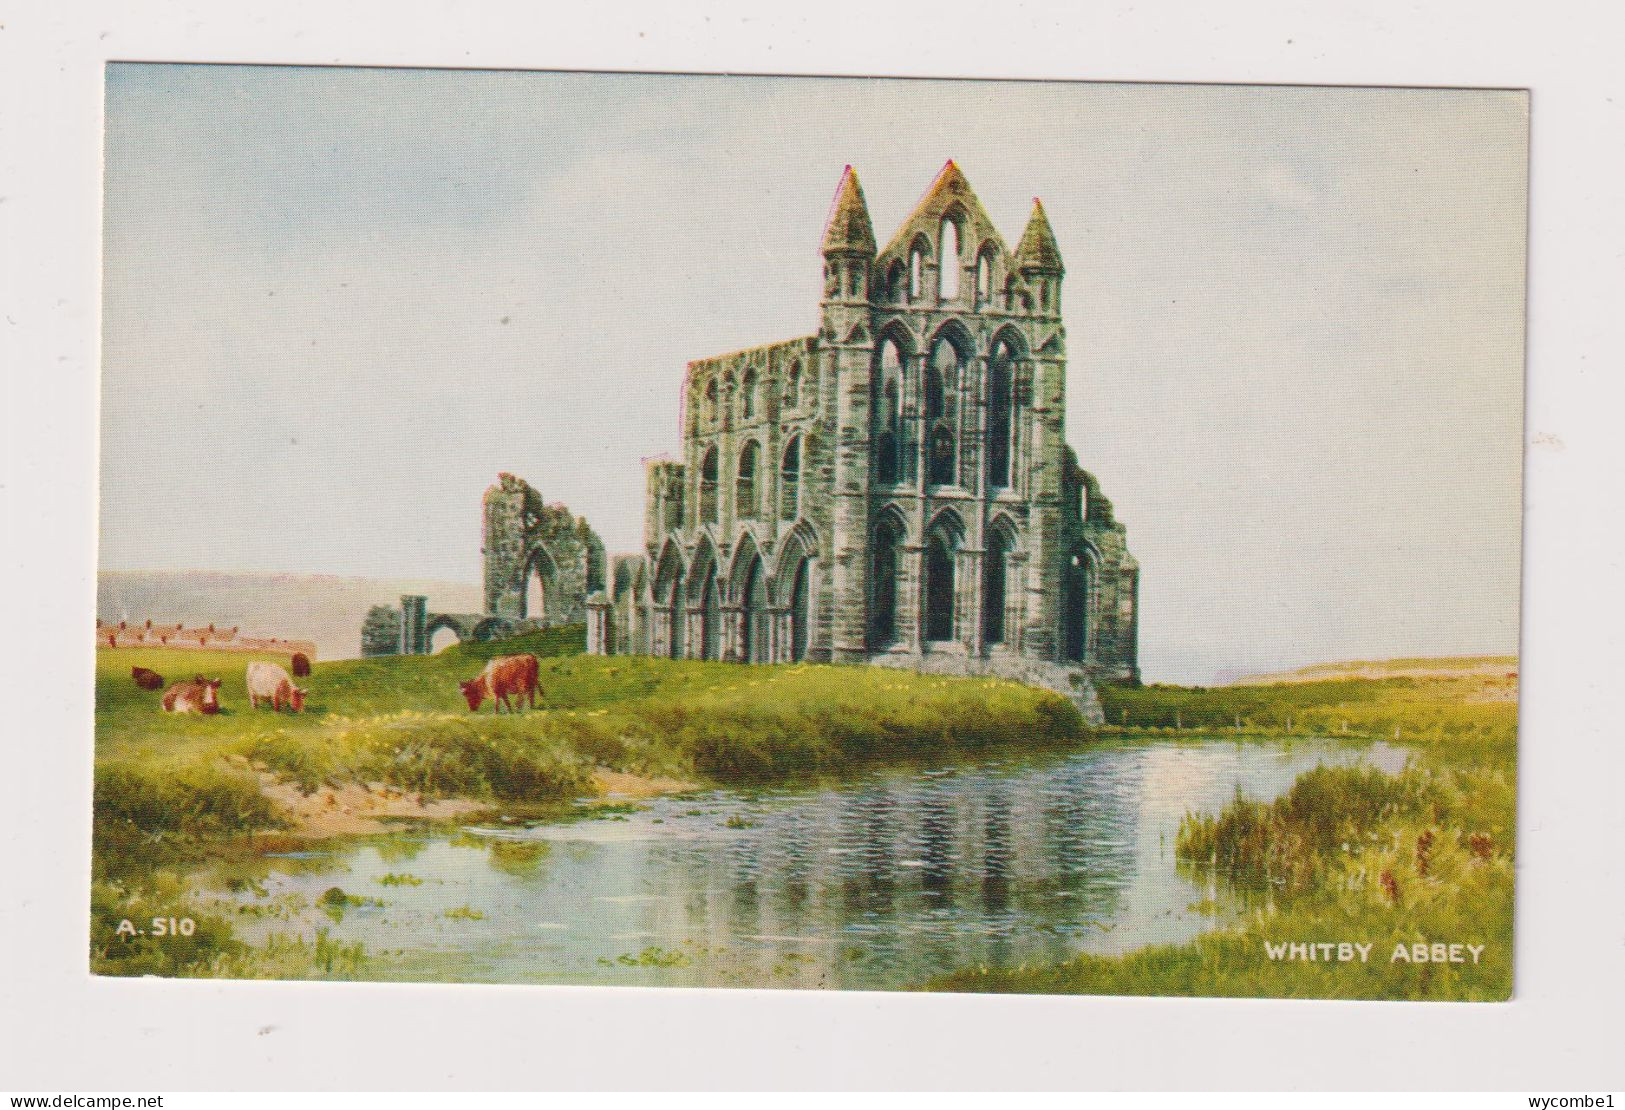 ENGLAND -  Whitby Abbey  Unused Vintage Postcard - Whitby